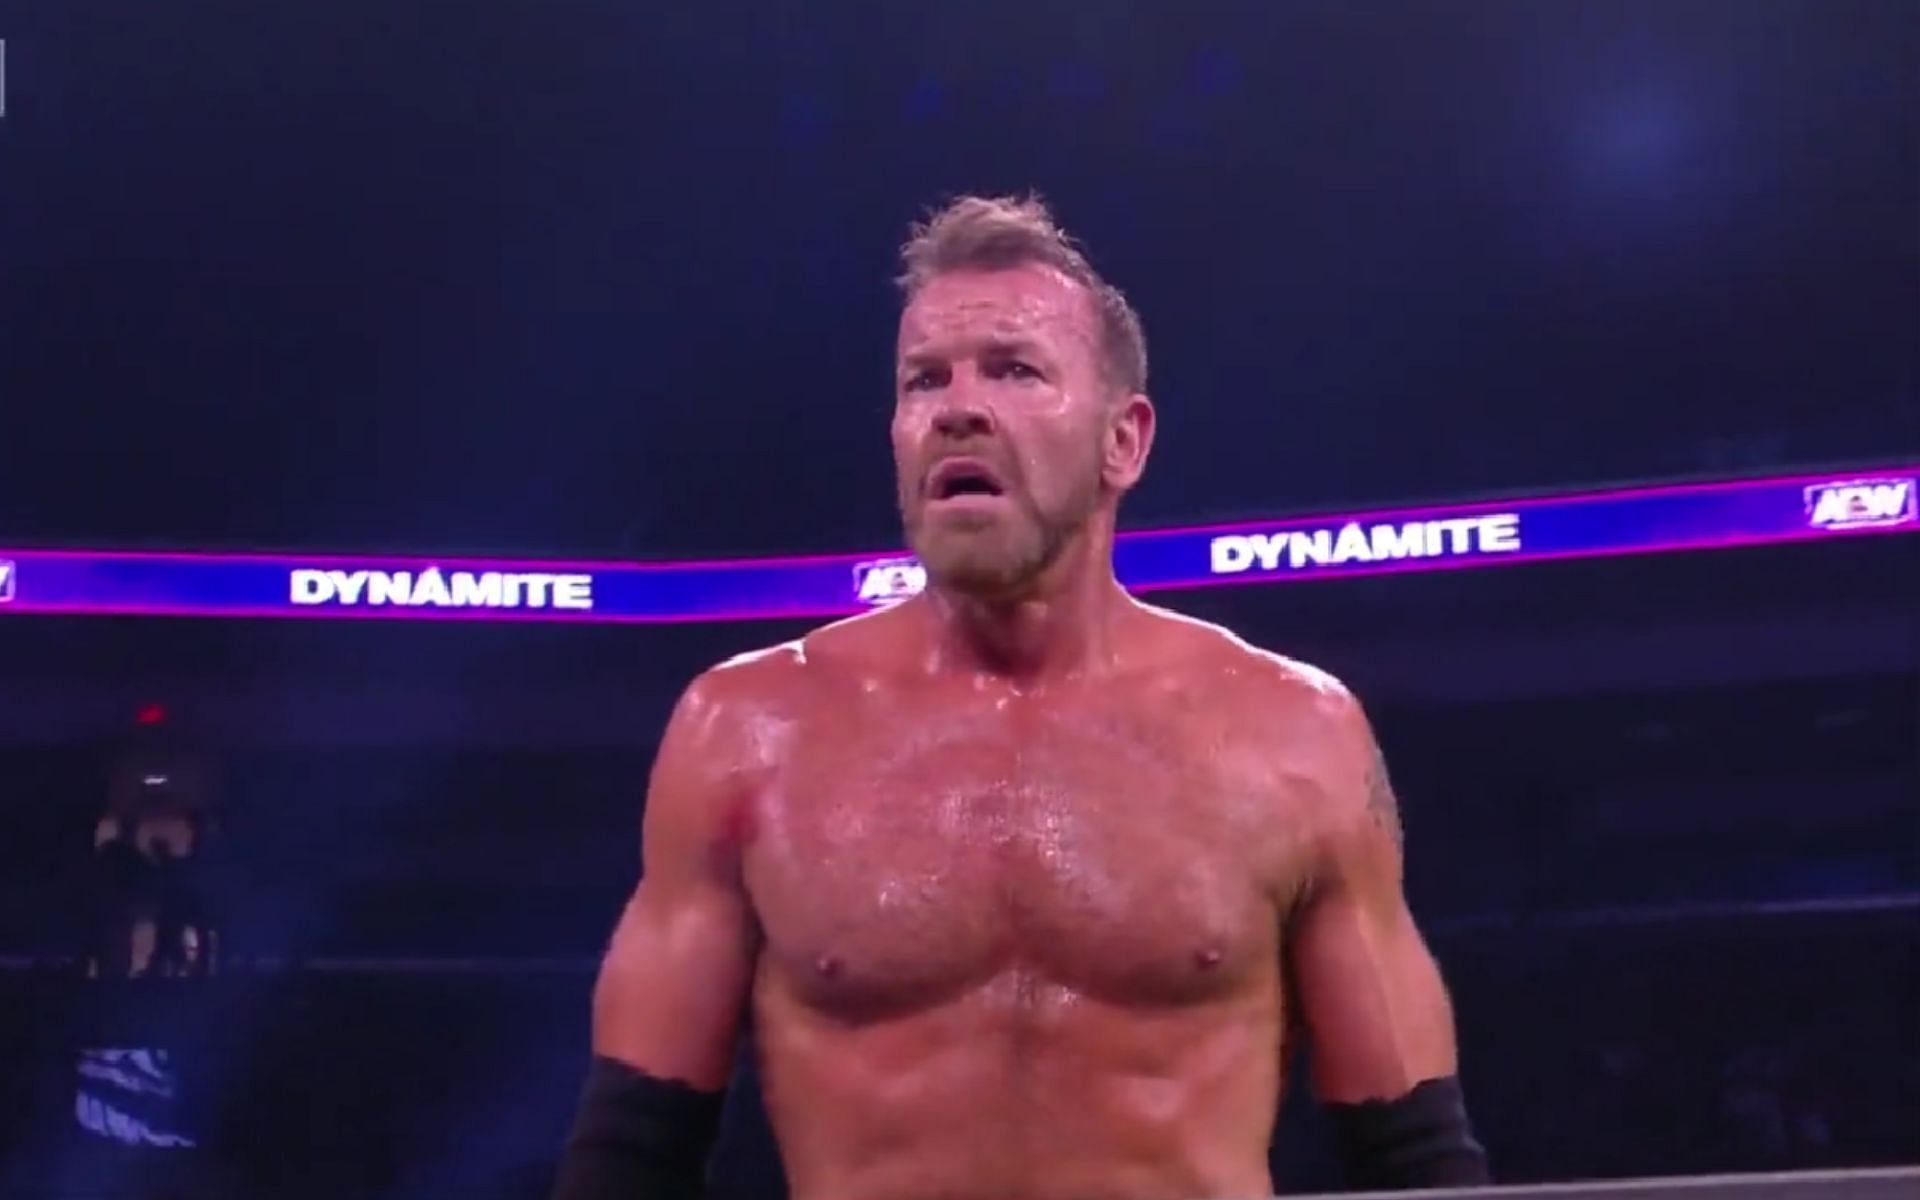 AEW star Christian Cage faced a former WWE superstar earlier on Dynamite.